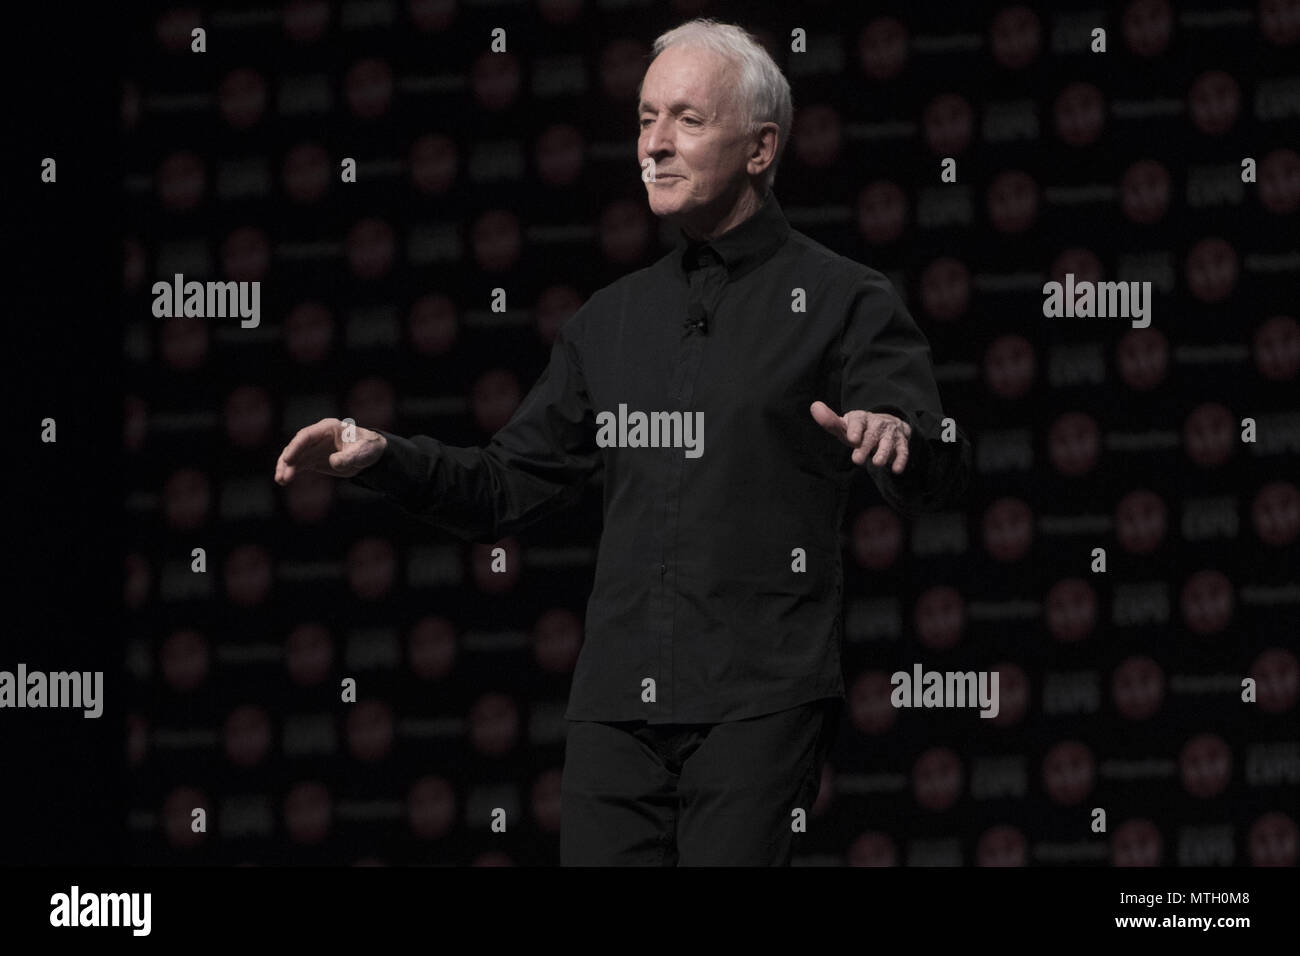 Actor Anthony Daniels attends the 2018 Calgary Comic and Entertainment Expo.  Featuring: Anthony Daniels Where: Calgary, Canada When: 27 Apr 2018 Credit: WENN.com Stock Photo